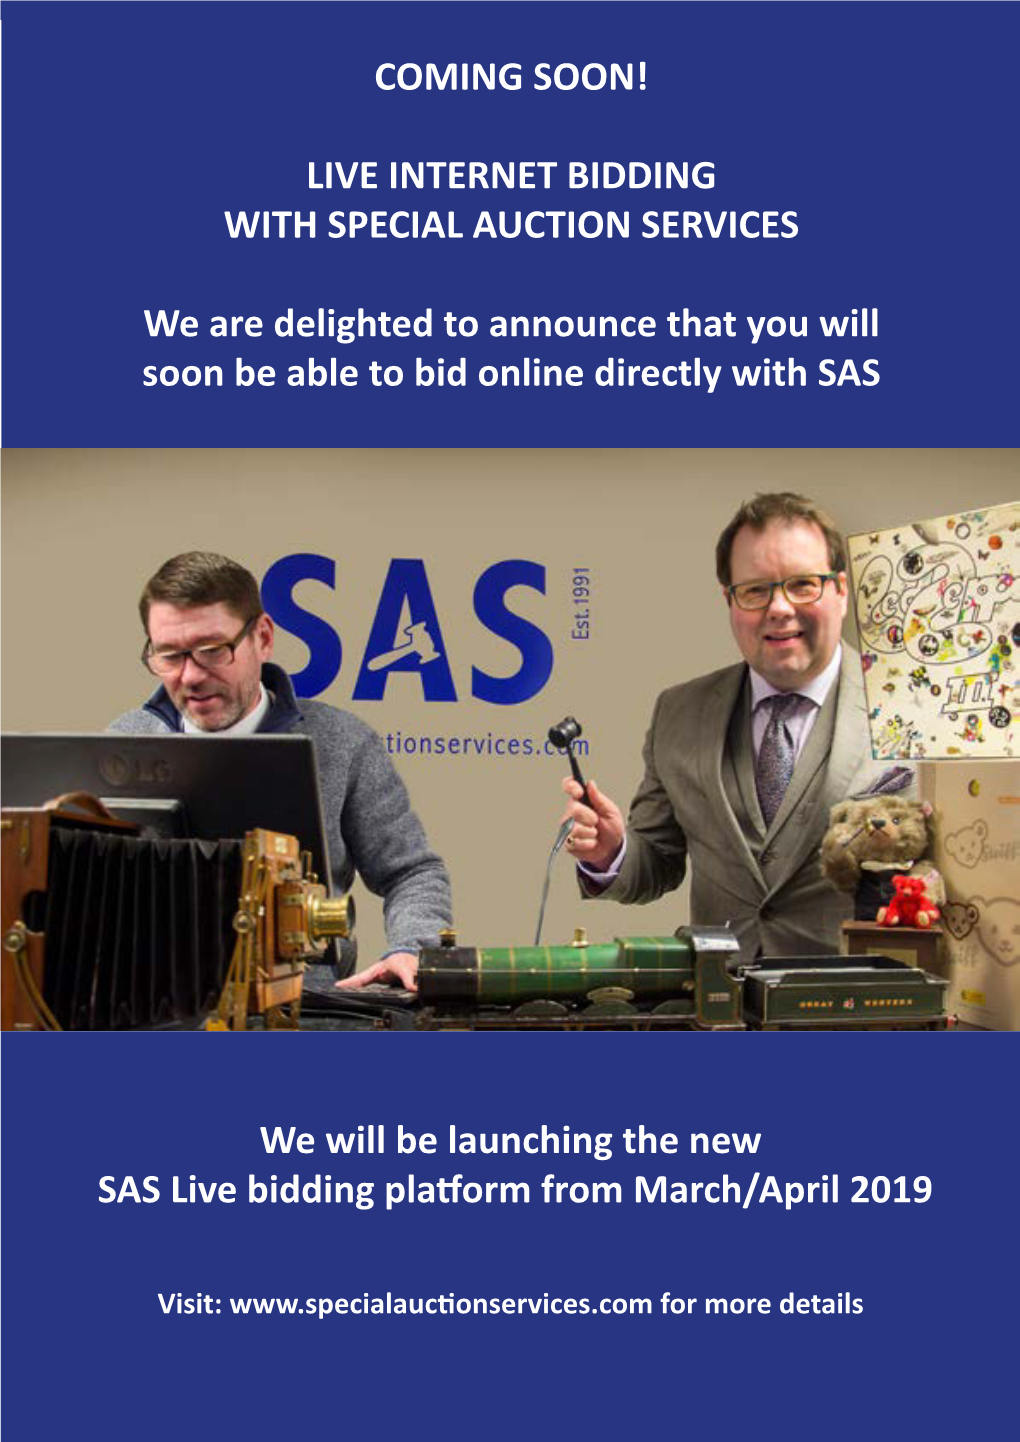 COMING SOON! LIVE INTERNET BIDDING with SPECIAL AUCTION SERVICES We Are Delighted to Announce That You Will Soon Be Able To